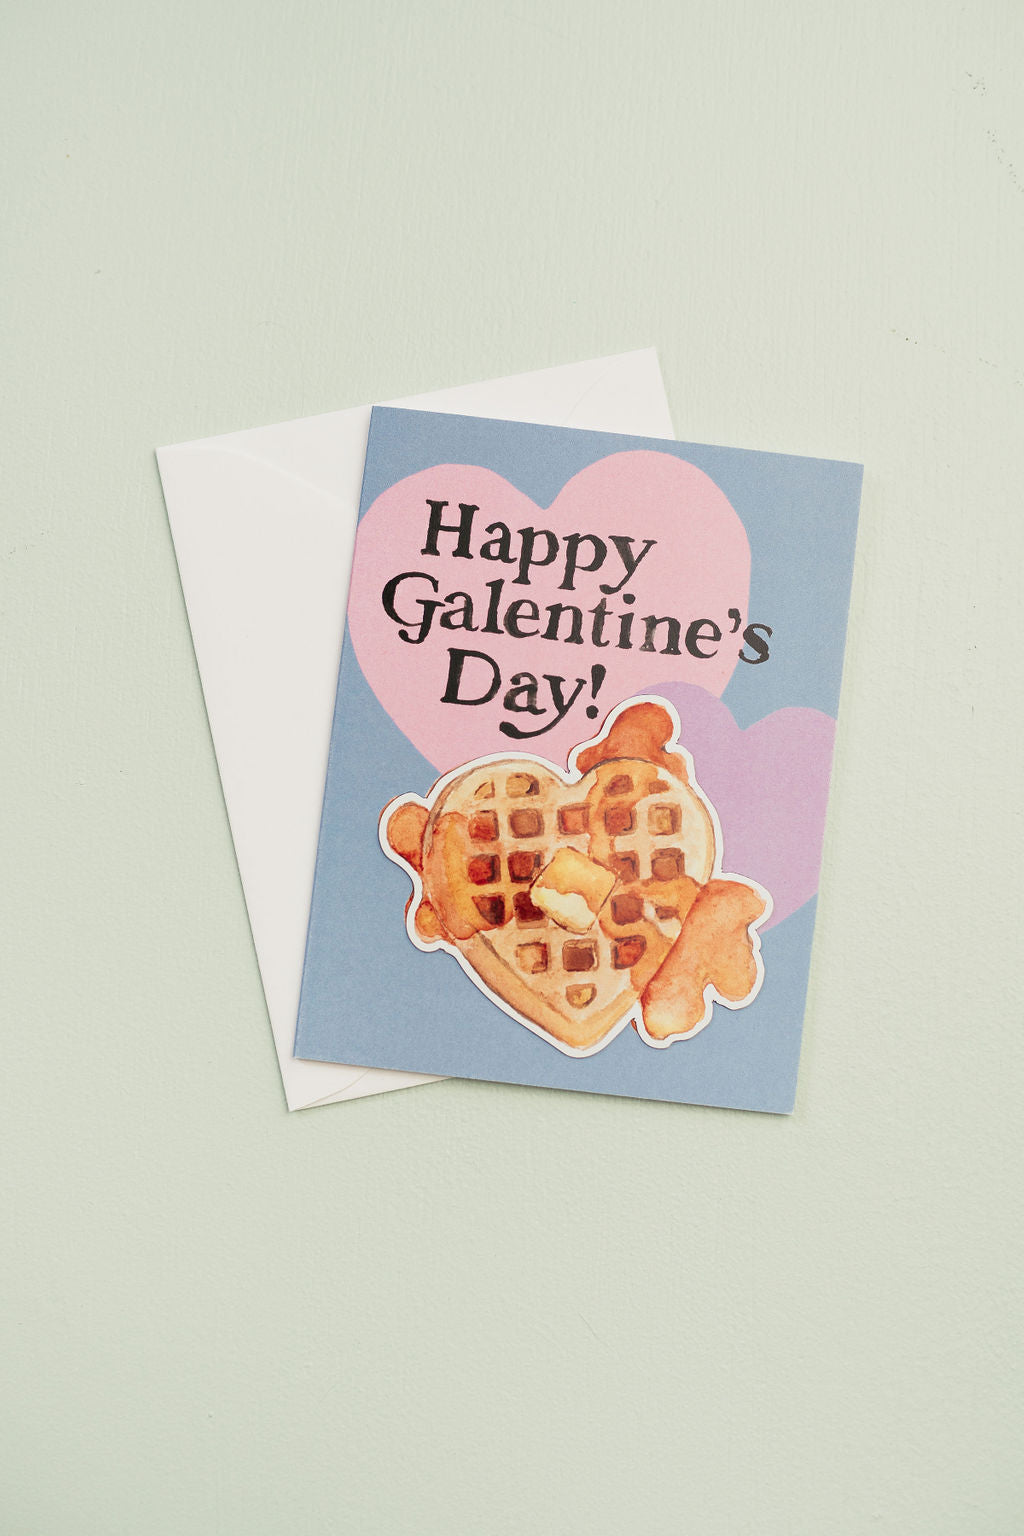 Happy Galentine's Day Waffles Greeting Card with Magnet